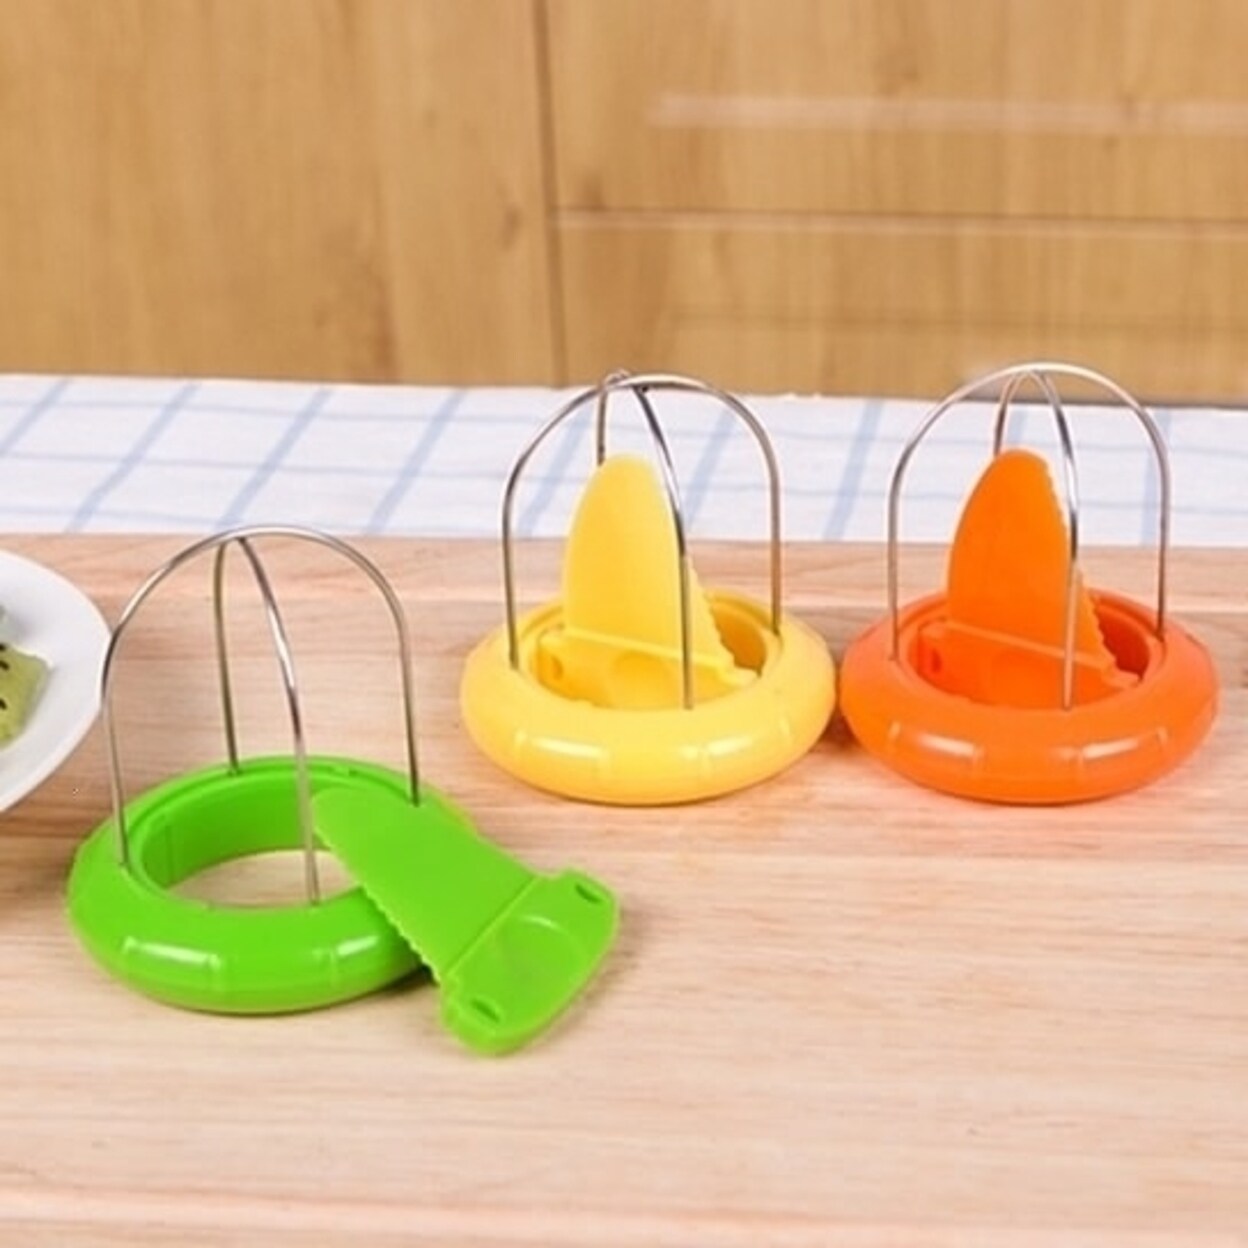 https://ak1.ostkcdn.com/images/products/is/images/direct/41443a34a4a02a195d0ec352b07c2678570b698a/Fruit-Kiwi-Cutter-Device-Cut-Digging-Core-Twister-Slicer-Kitchen-Peeler.jpg